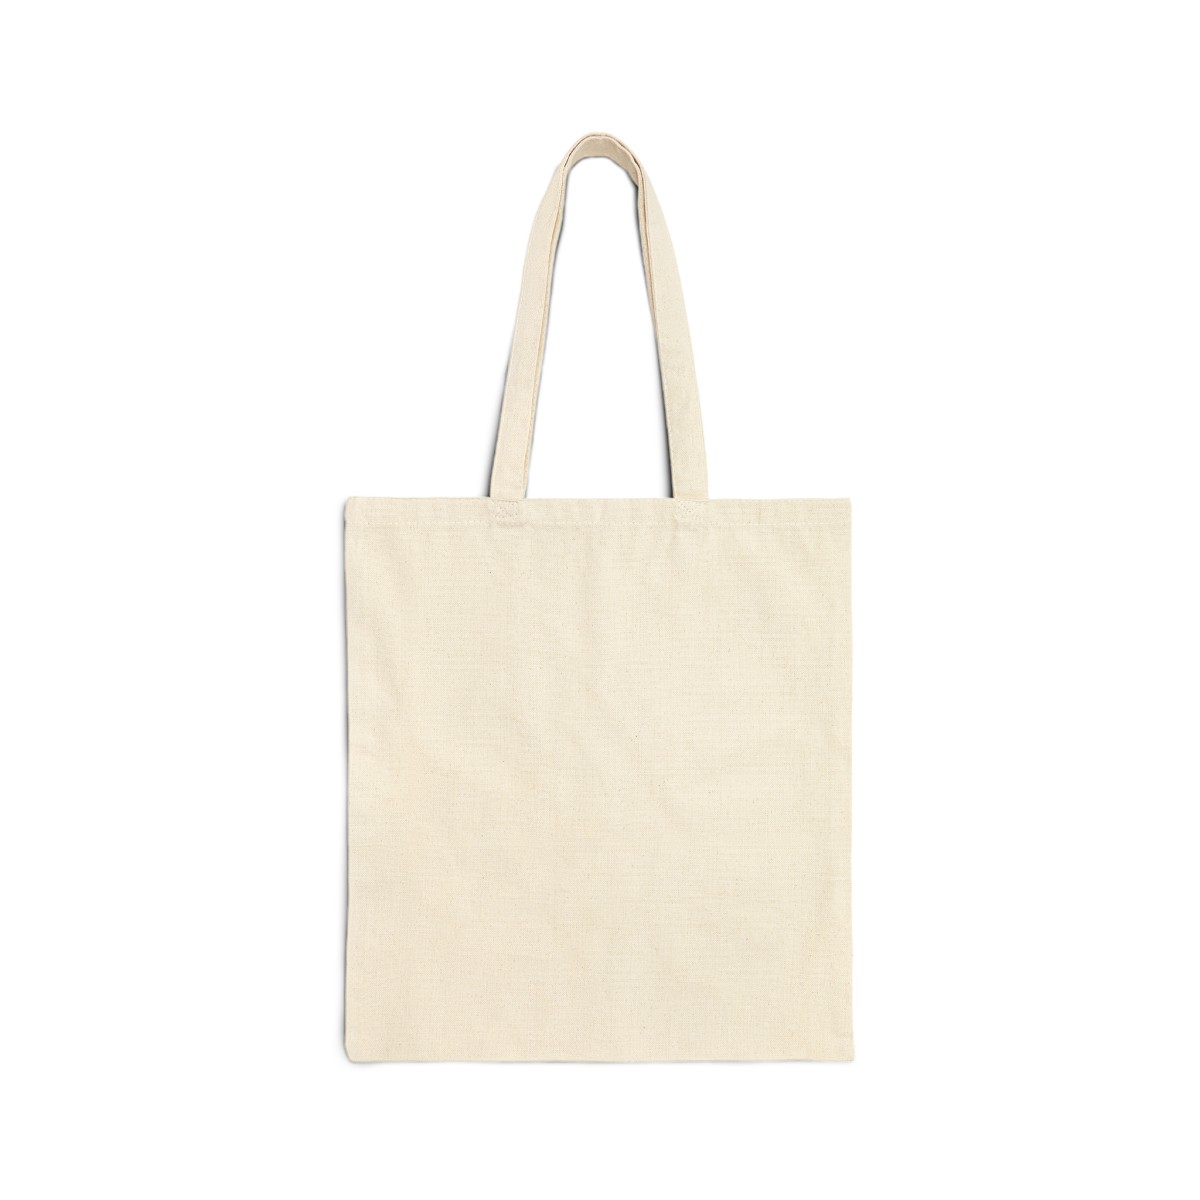 Canal Map Cotton Canvas Tote Bag product thumbnail image